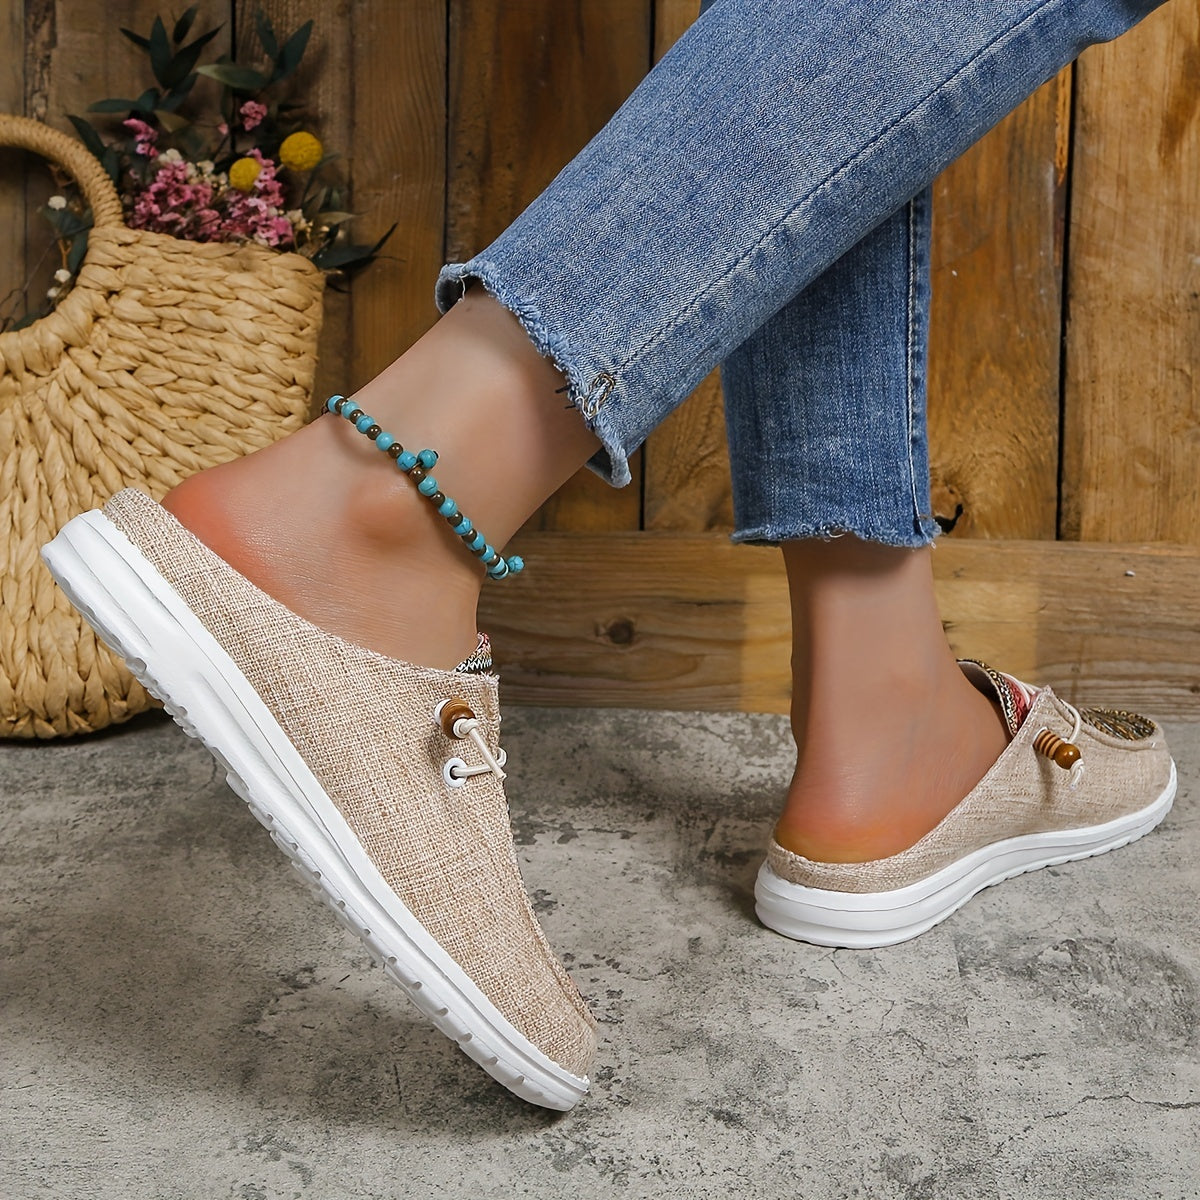 Women's Ethnic Style Canvas Shoes, Lightweight Lace Up Mule Sneakers, Lightweight & Comfortable Shoes